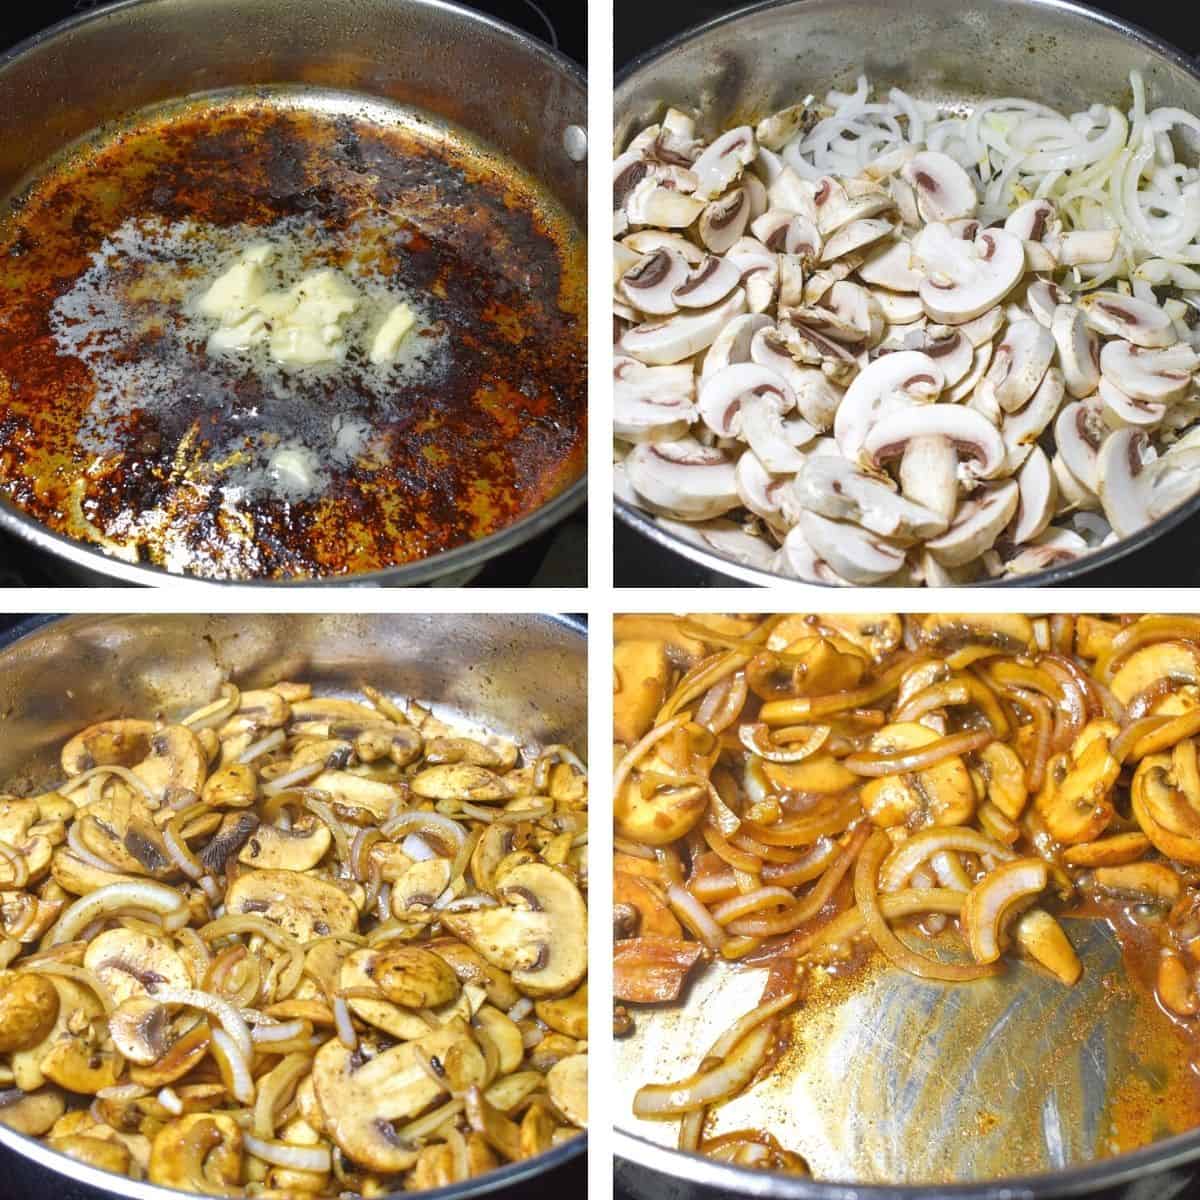 Four images showing the steps to cooking the onions and mushrooms in the pan drippings.